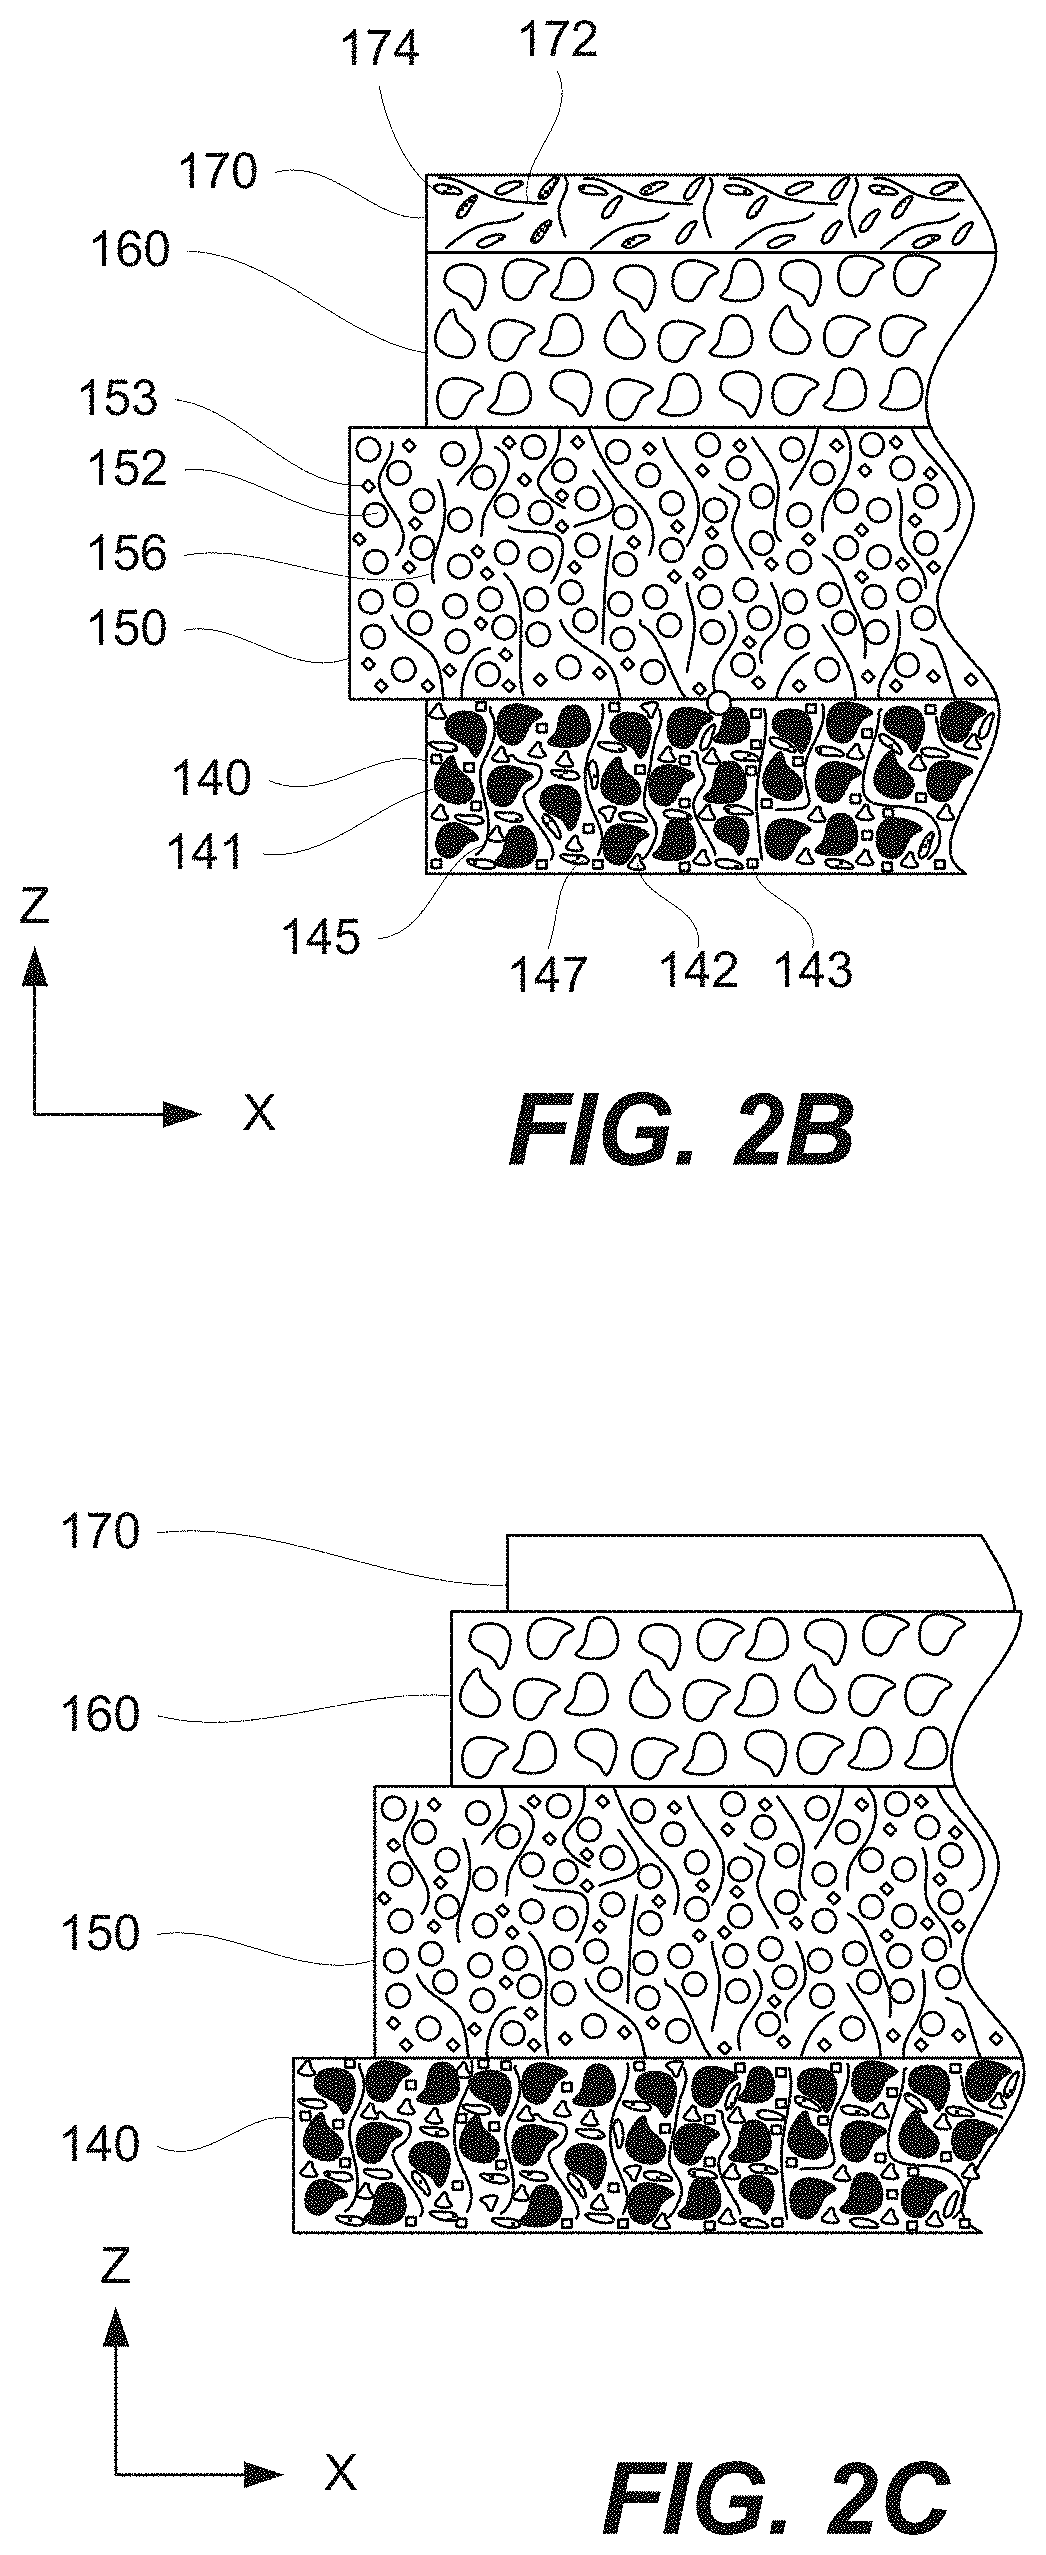 Electronic circuits with directly integrated electrochemical cells